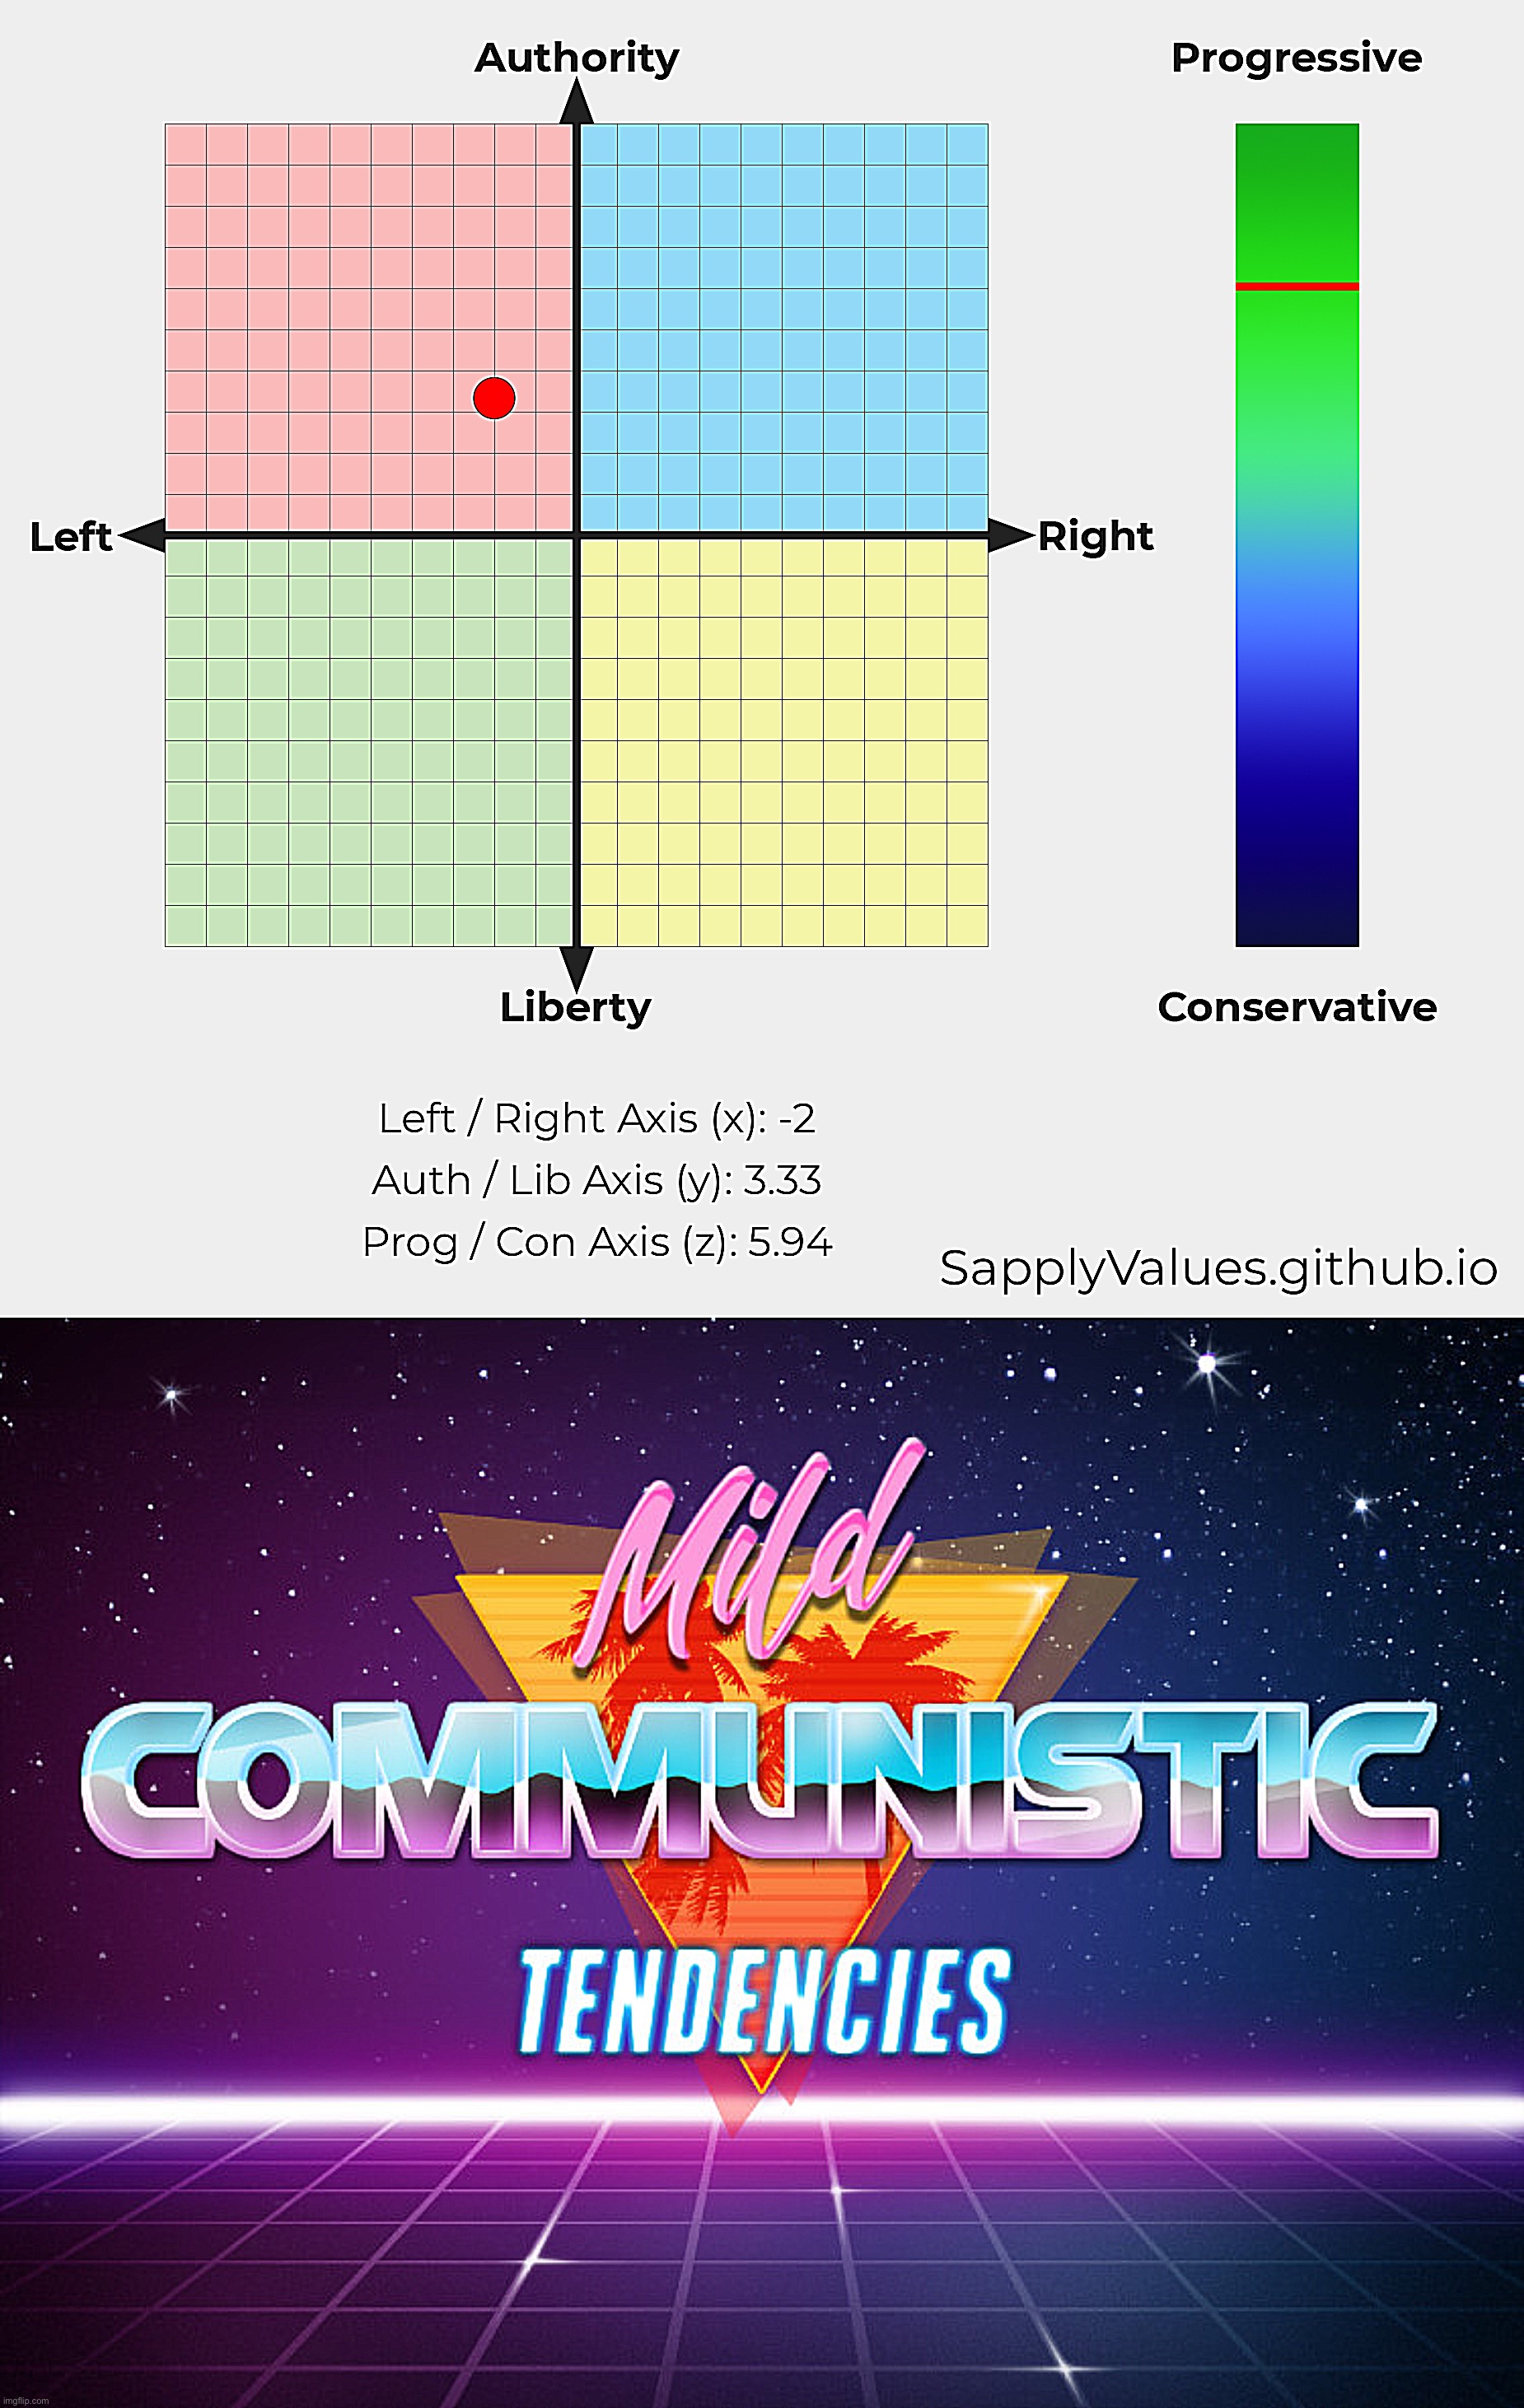 Ooh, upper-left quadrant — exotic (lol I actually answered Communism is a failed ideology) | image tagged in sloth sapply values,mild communistic tendencies,political compass,commie,progressive,commies | made w/ Imgflip meme maker